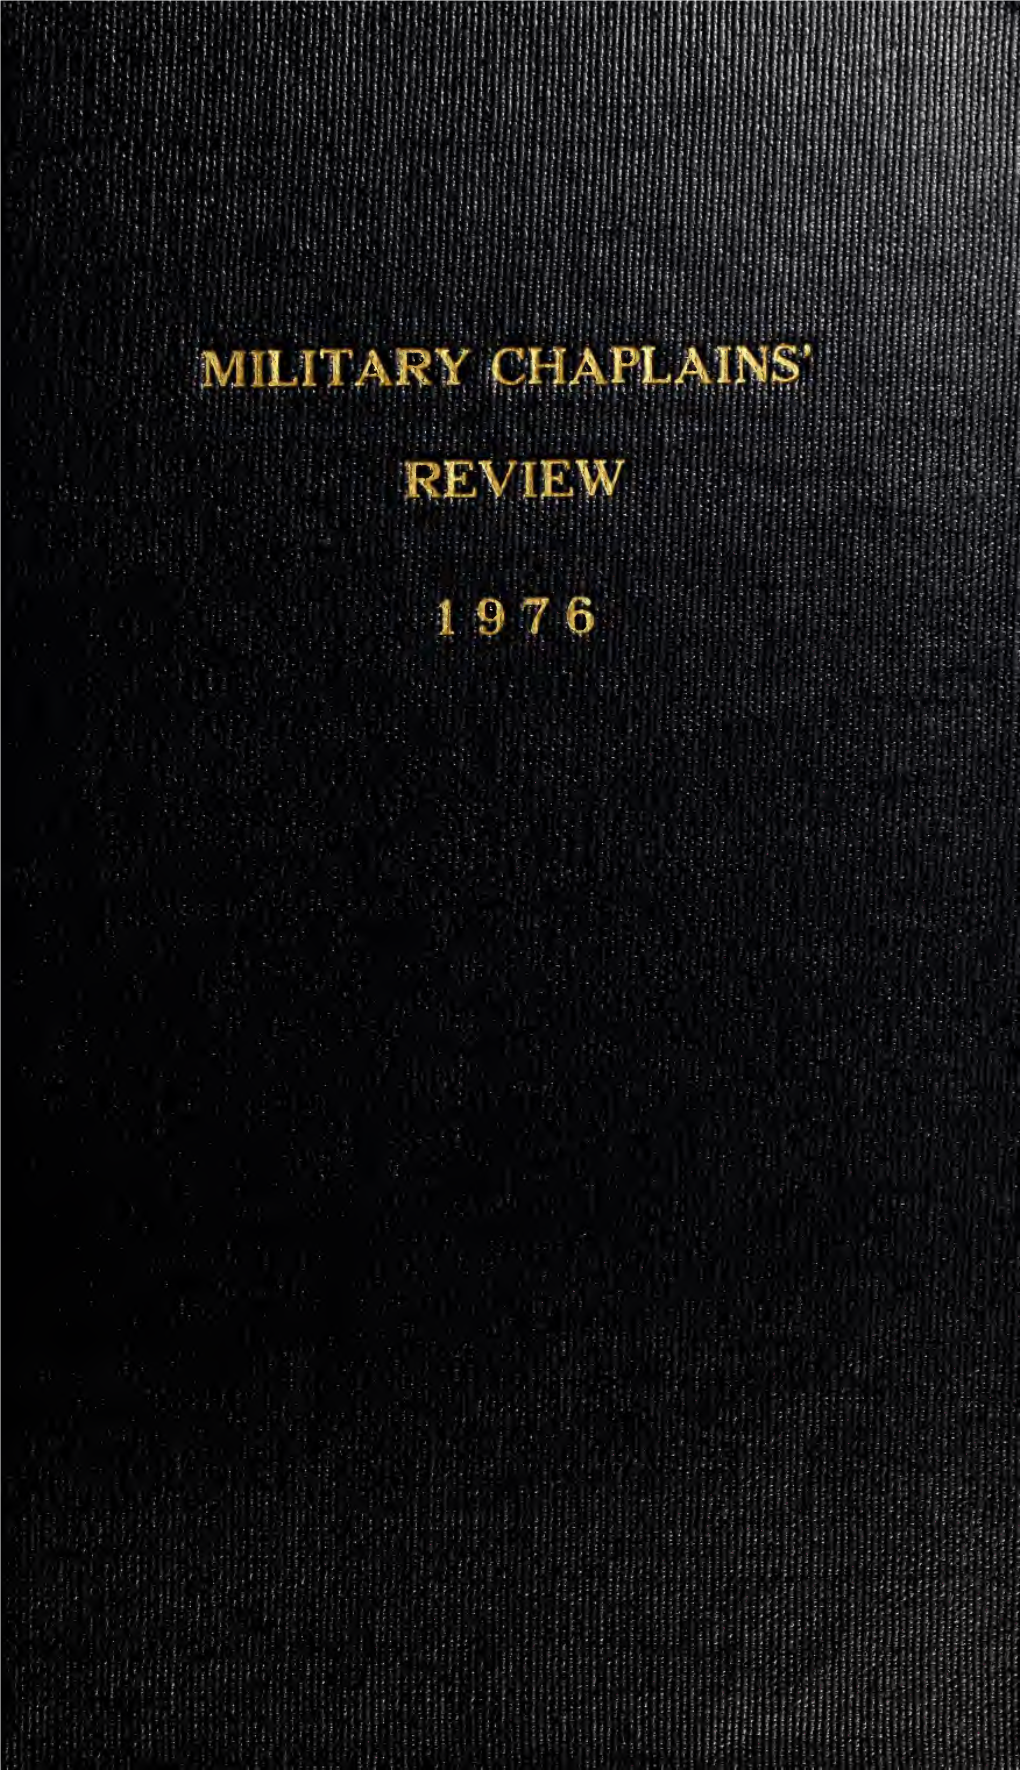 The Military Chaplains' Review Is Published Quarterly